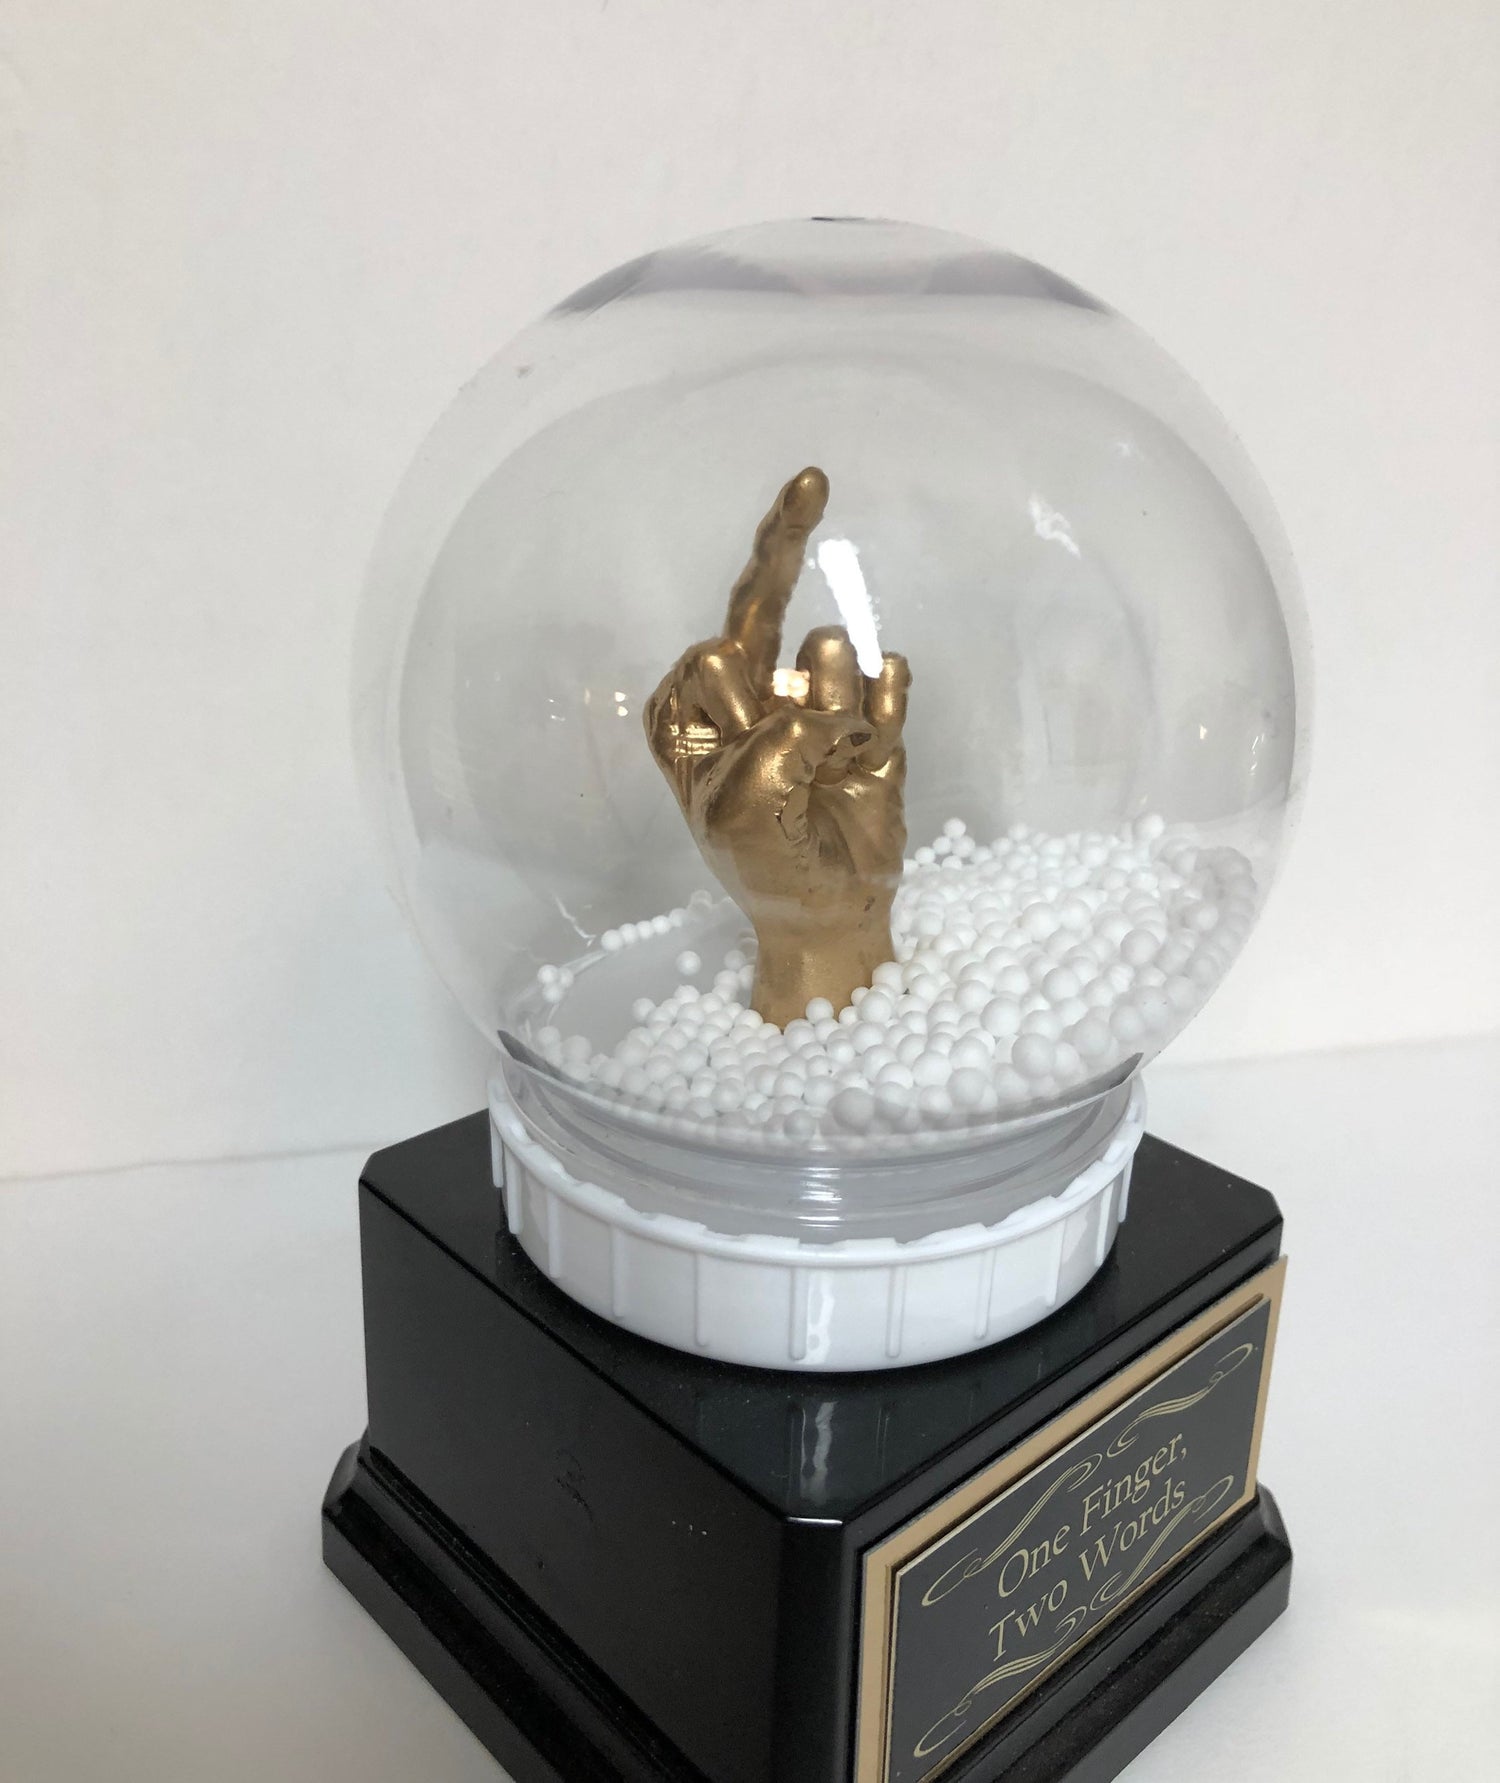 Middle Finger Funny Trophy Snow Globe FFL Loser Award Adult Humor The Bird F*ck You One Finger Two Words Christmas Gag Gift